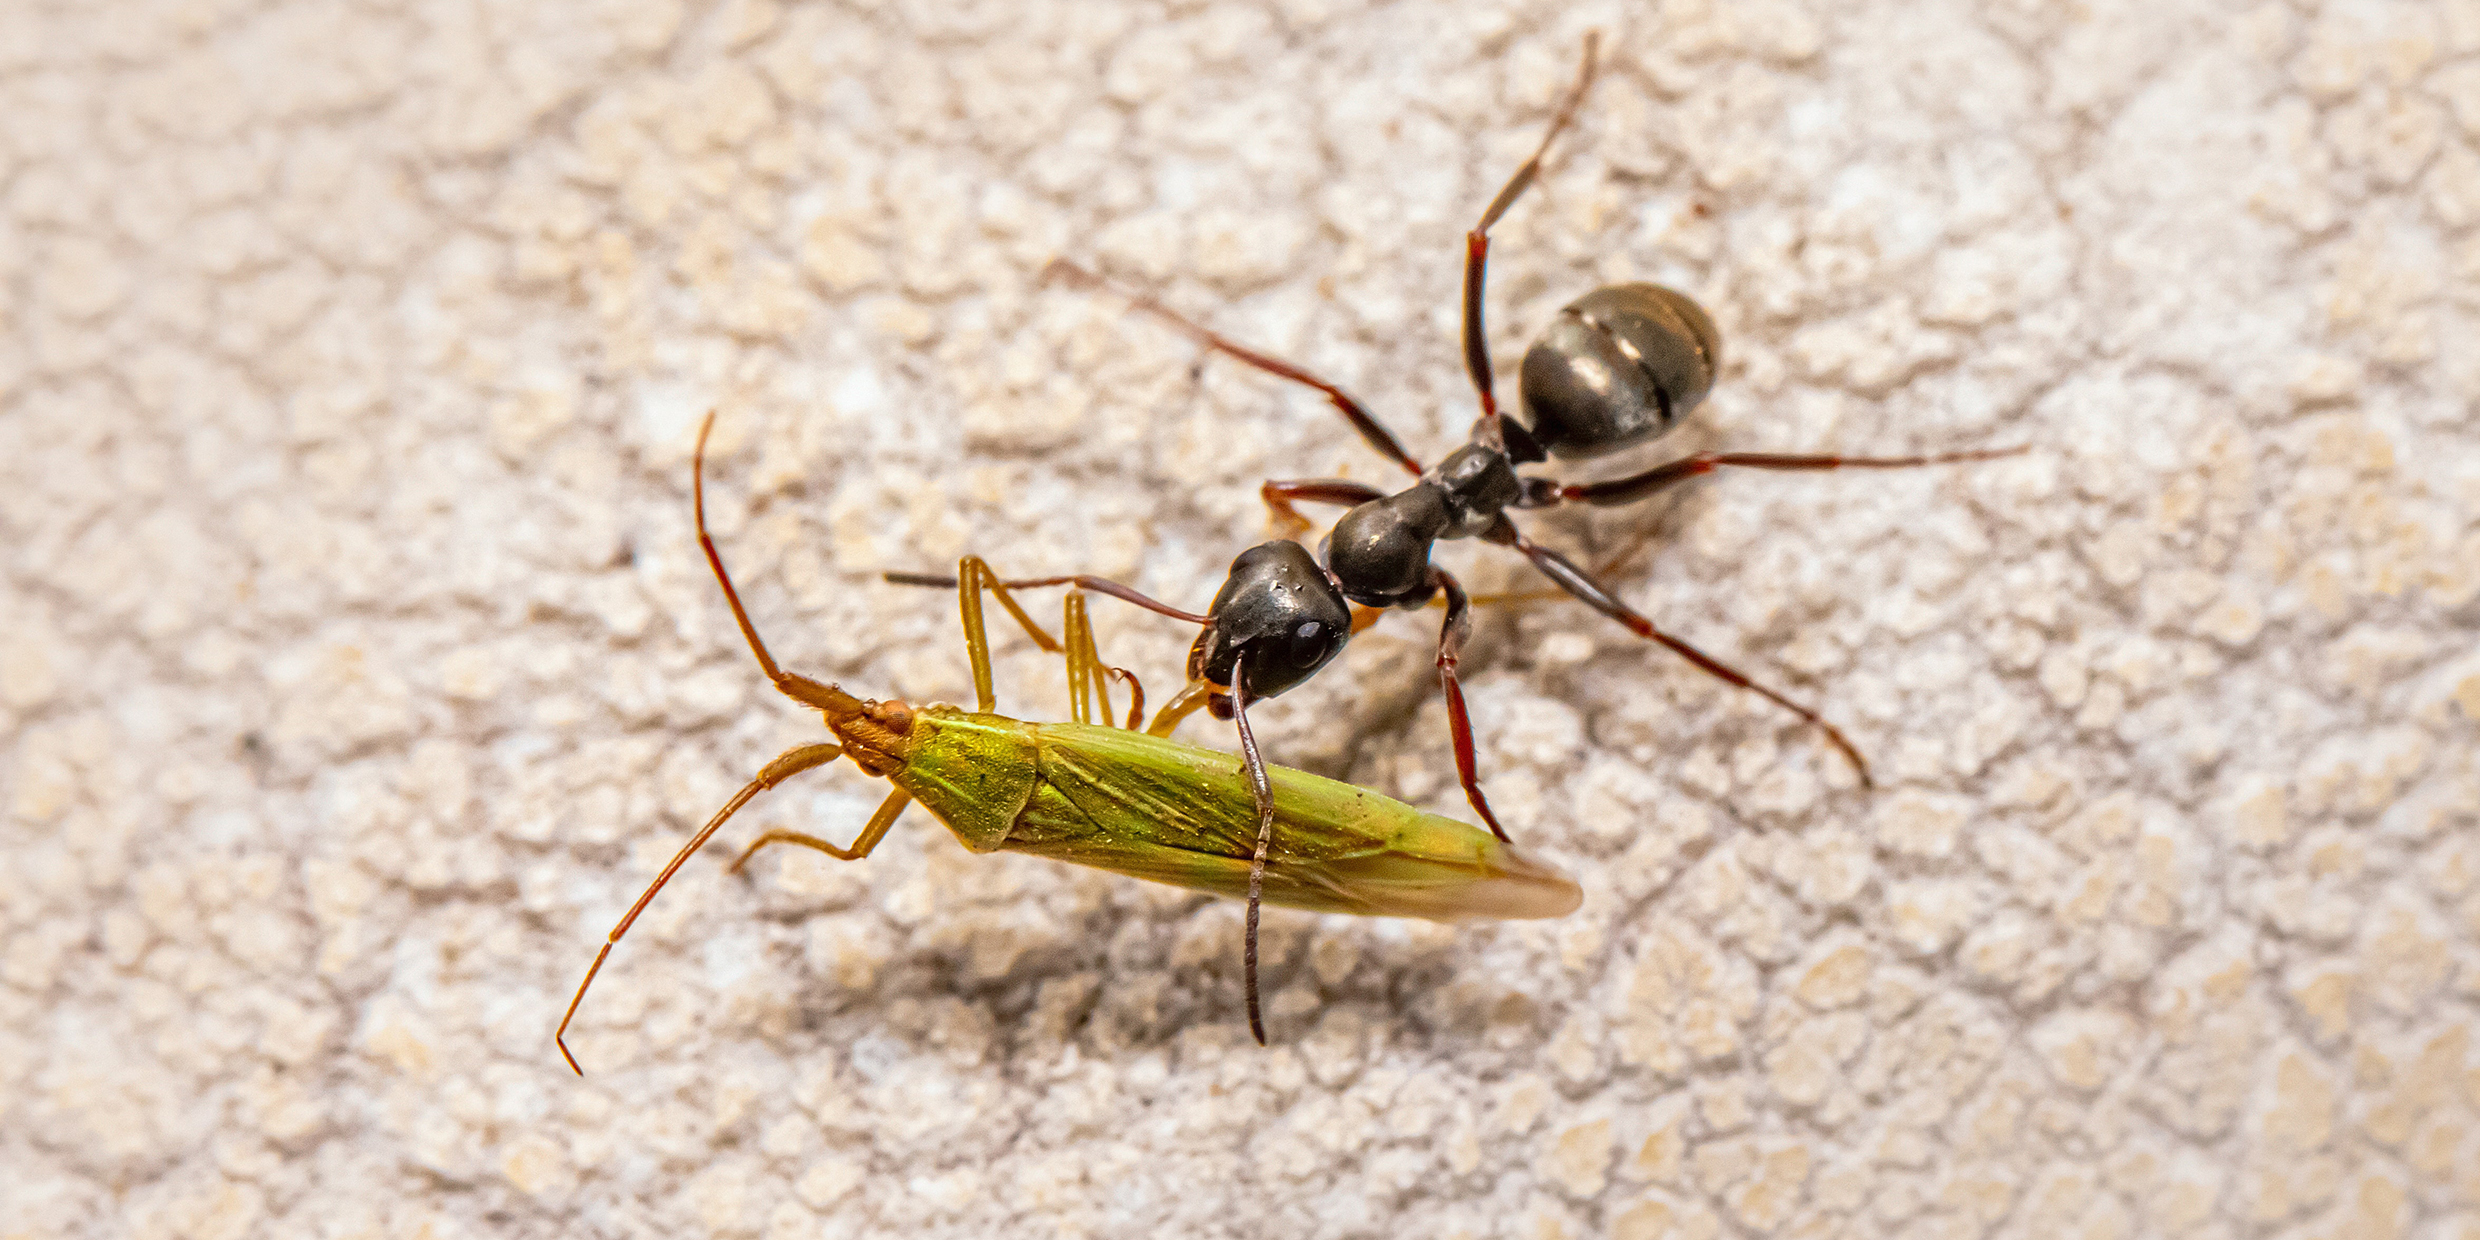 Image of an ant carrying another insect in its mandibles